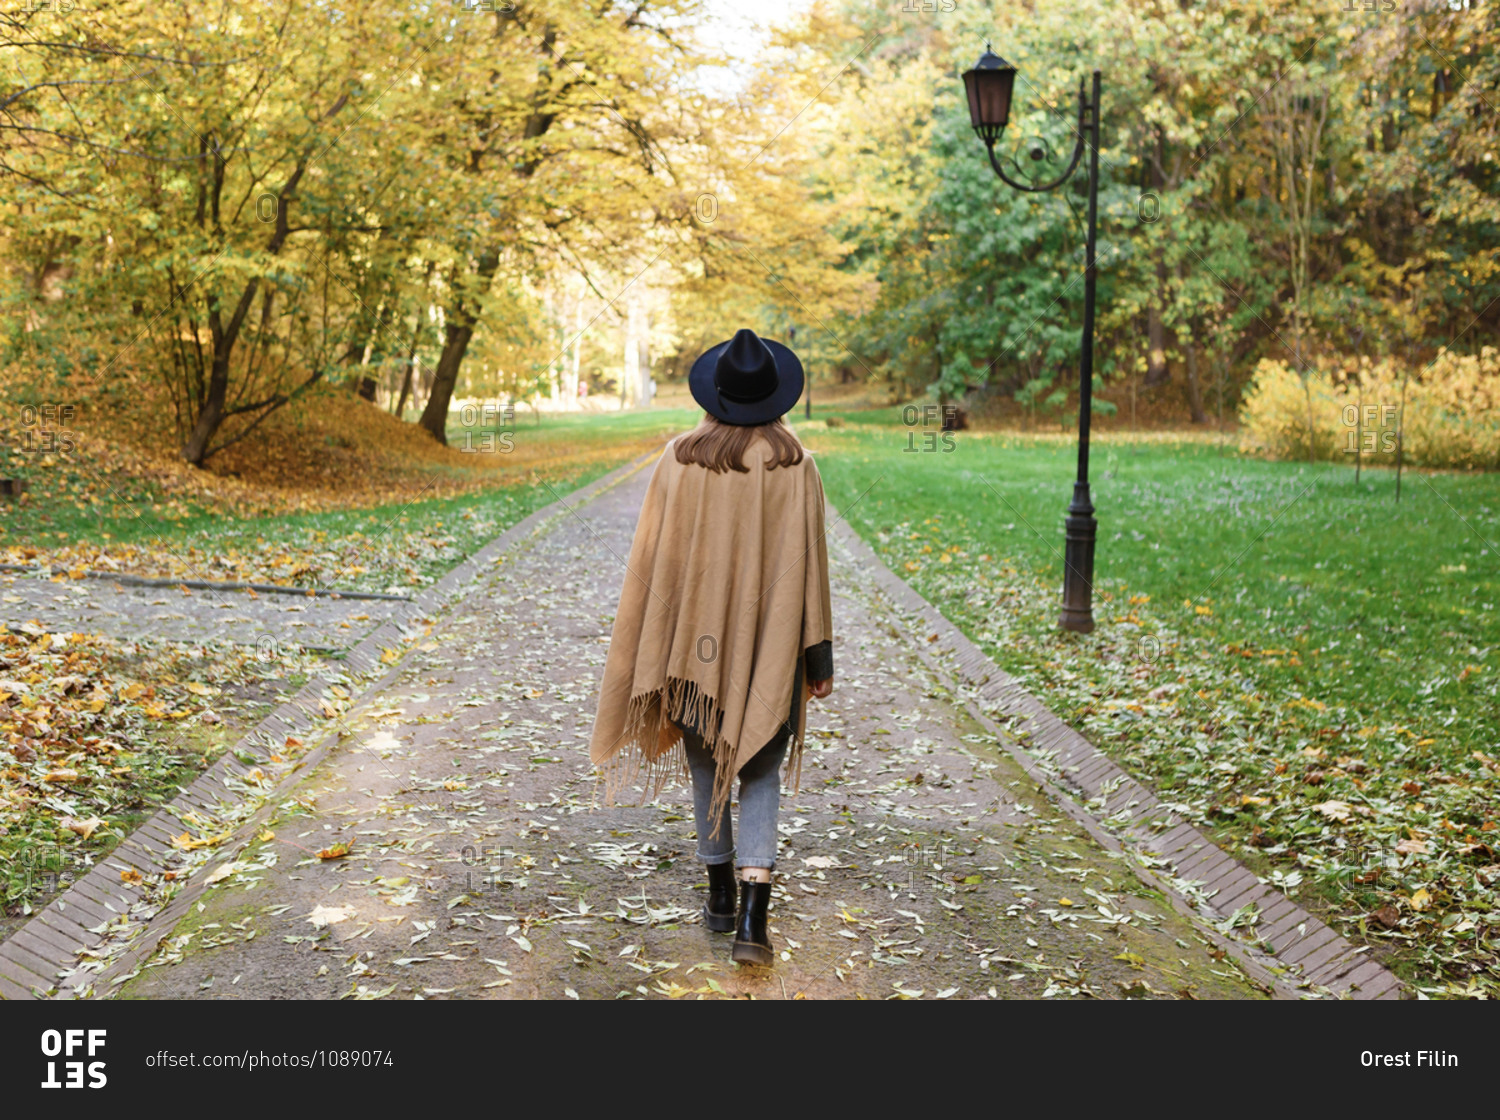 A young woman in a black hat and poncho is walking in the park in the autumn season